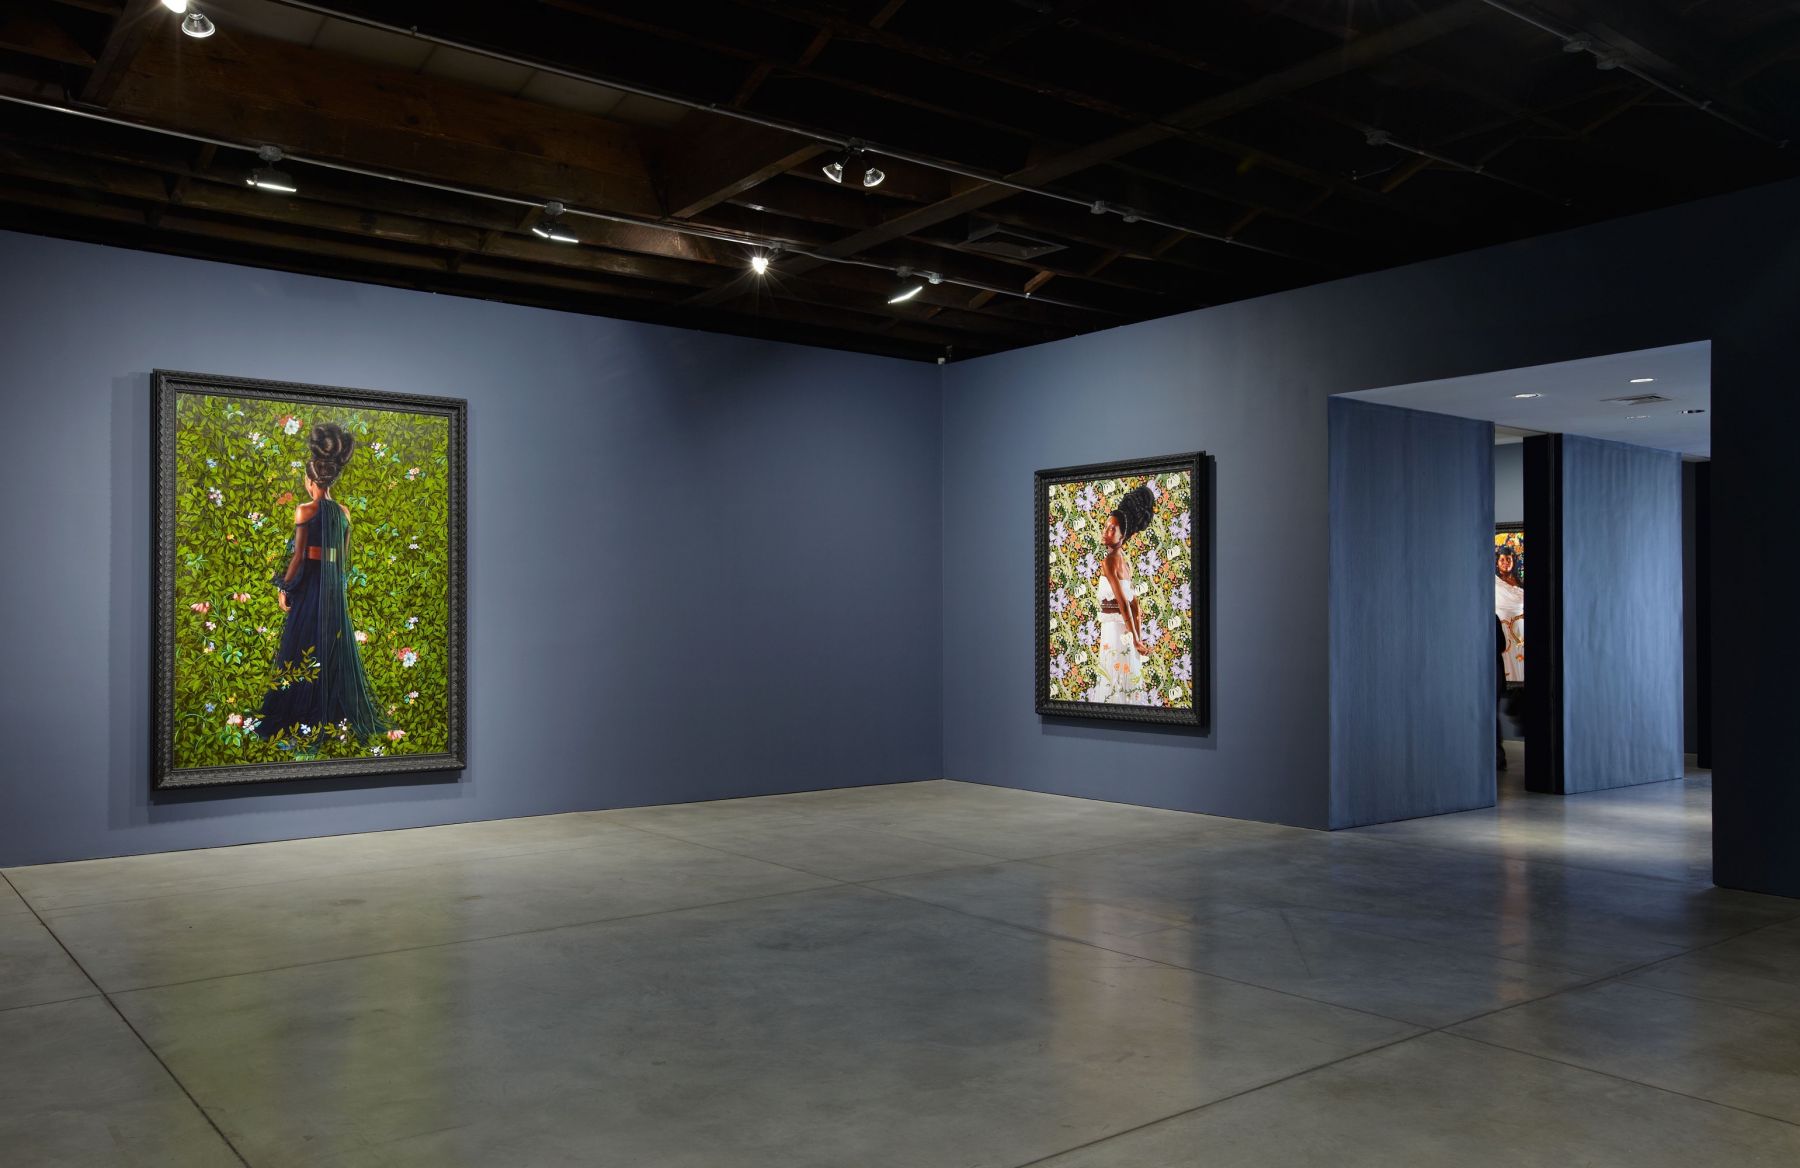 Kehinde Wiley | An Economy of Grace, Sean Kelly Gallery, New York City, USA, May 6 - June 16, 2012 | 1